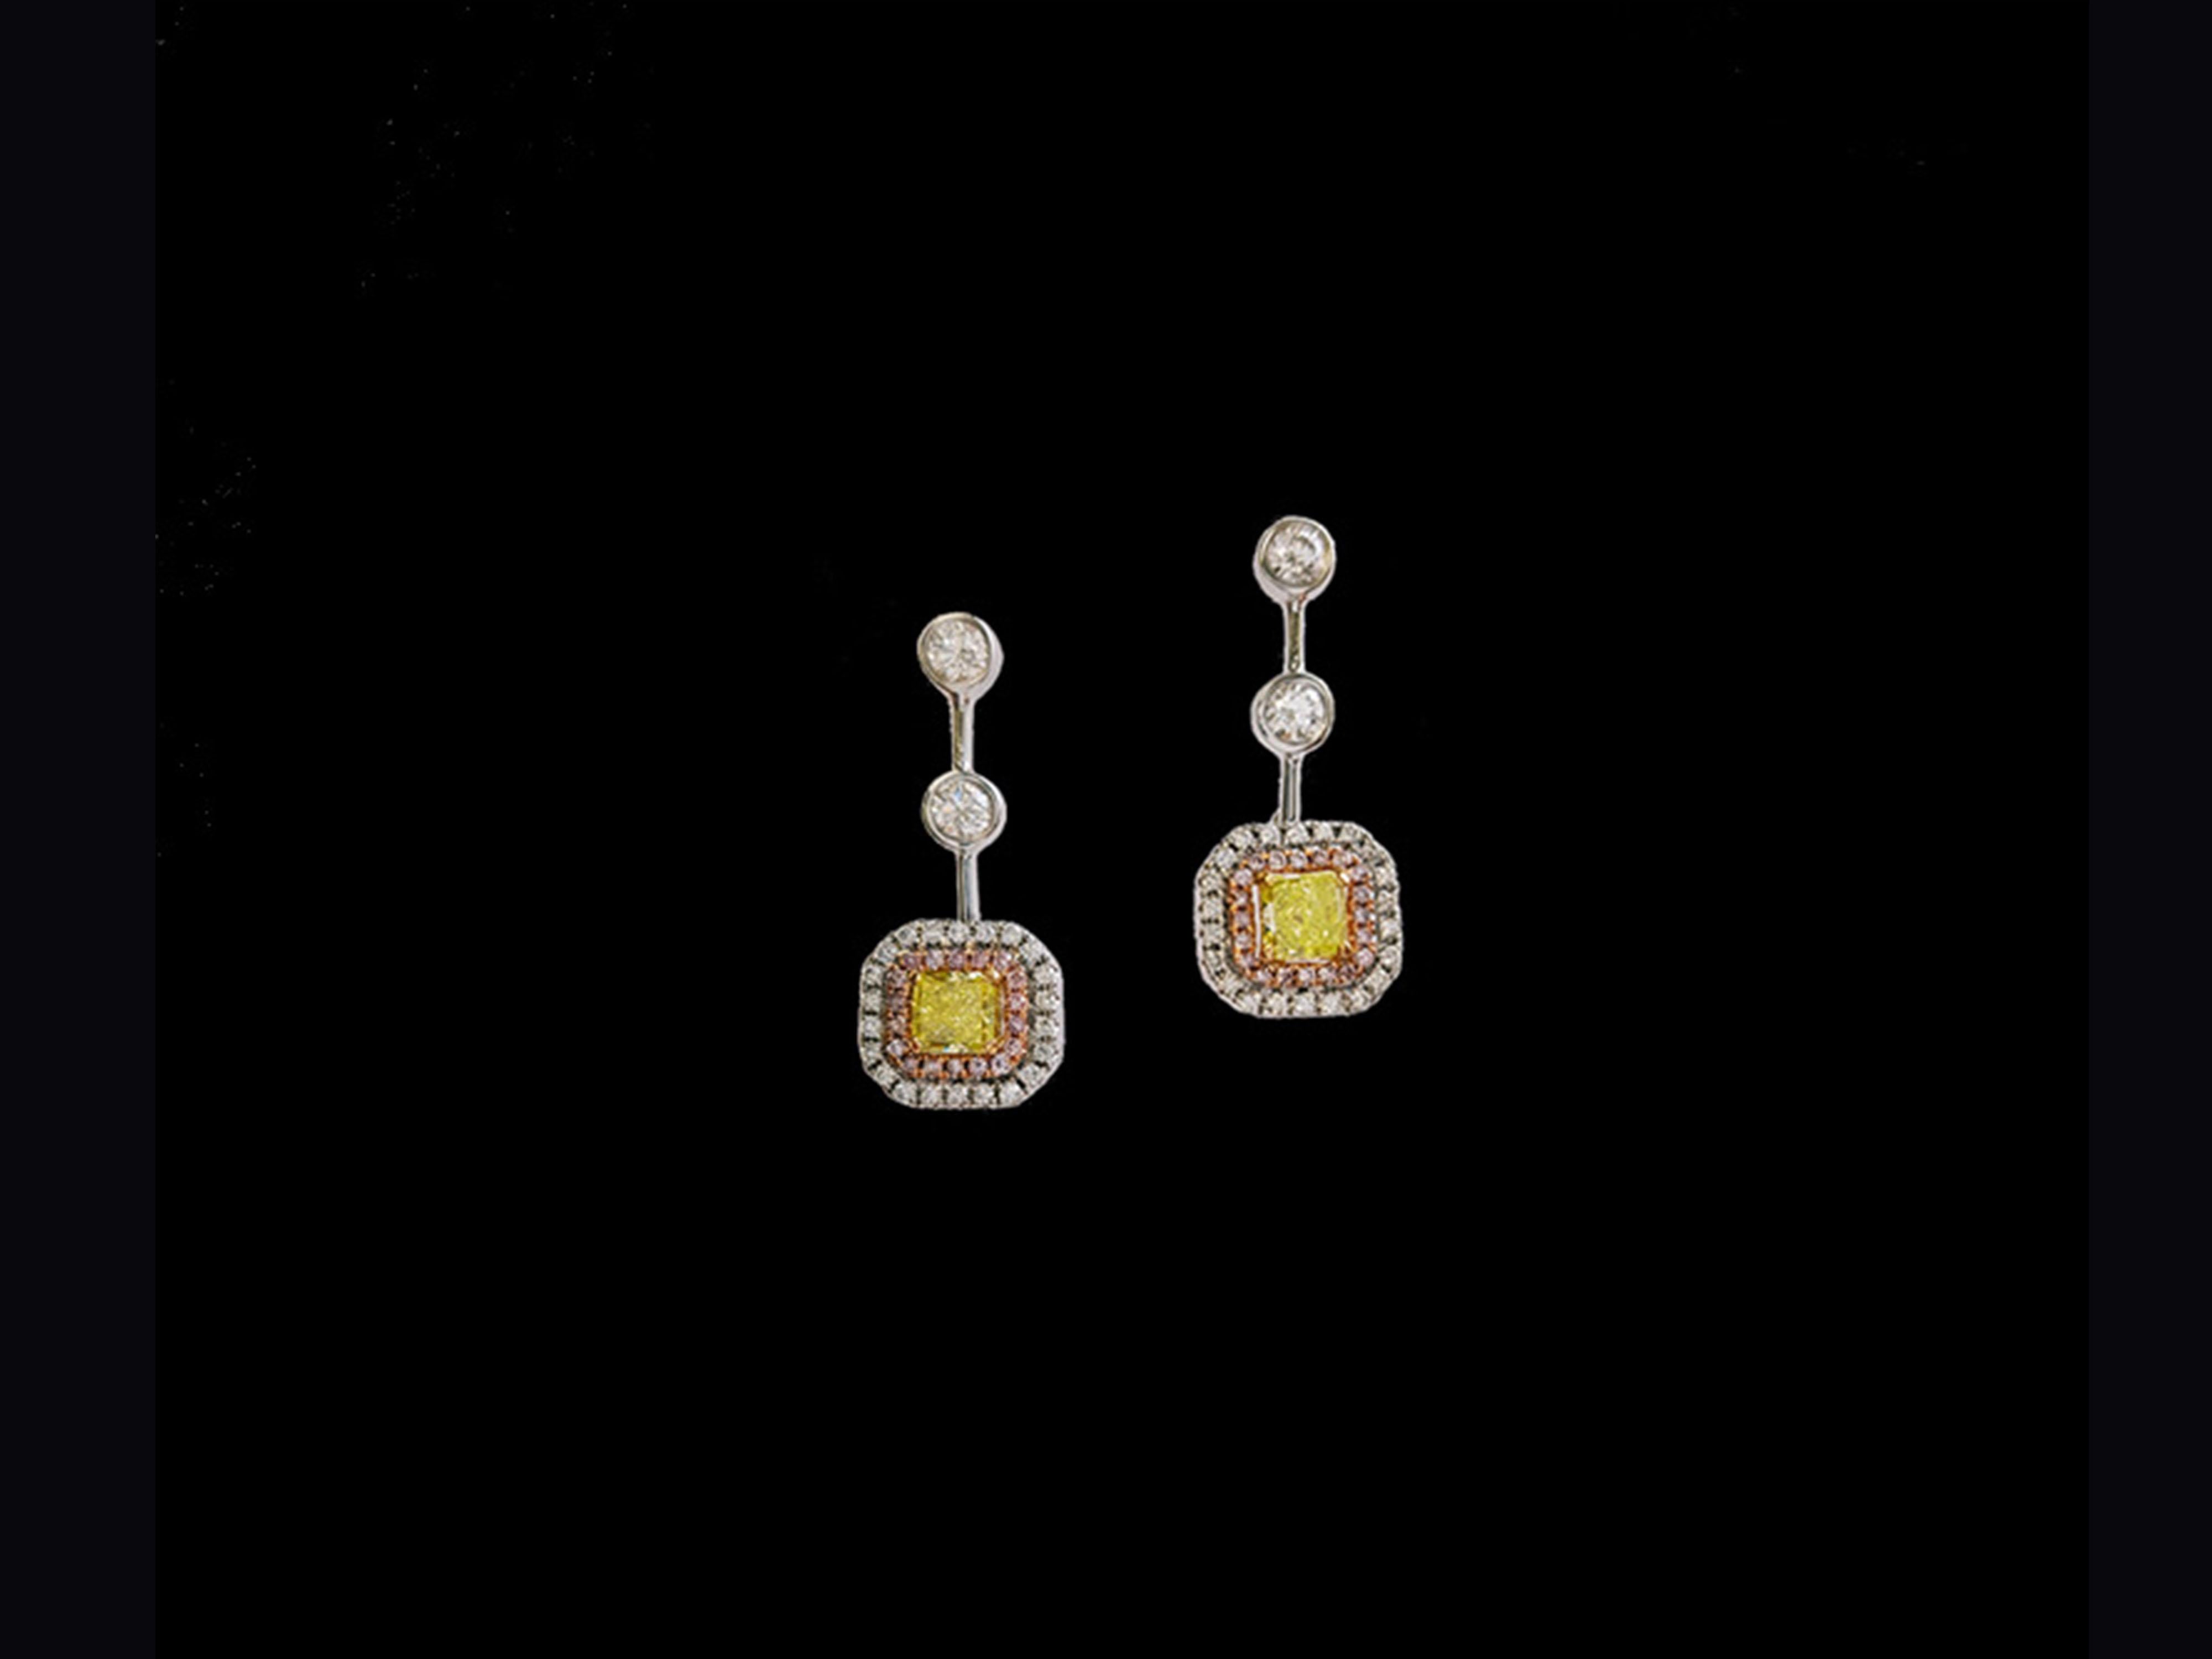 Novel Collection showcasing a stunning pair of 0.76 carat Fancy Intense Green-Yellow radiant cut diamond, GIA certified as SI1 clarity. Set with a perfect match of 4 round brilliant white diamonds at 0.40 carat and pink and white diamonds halo drop